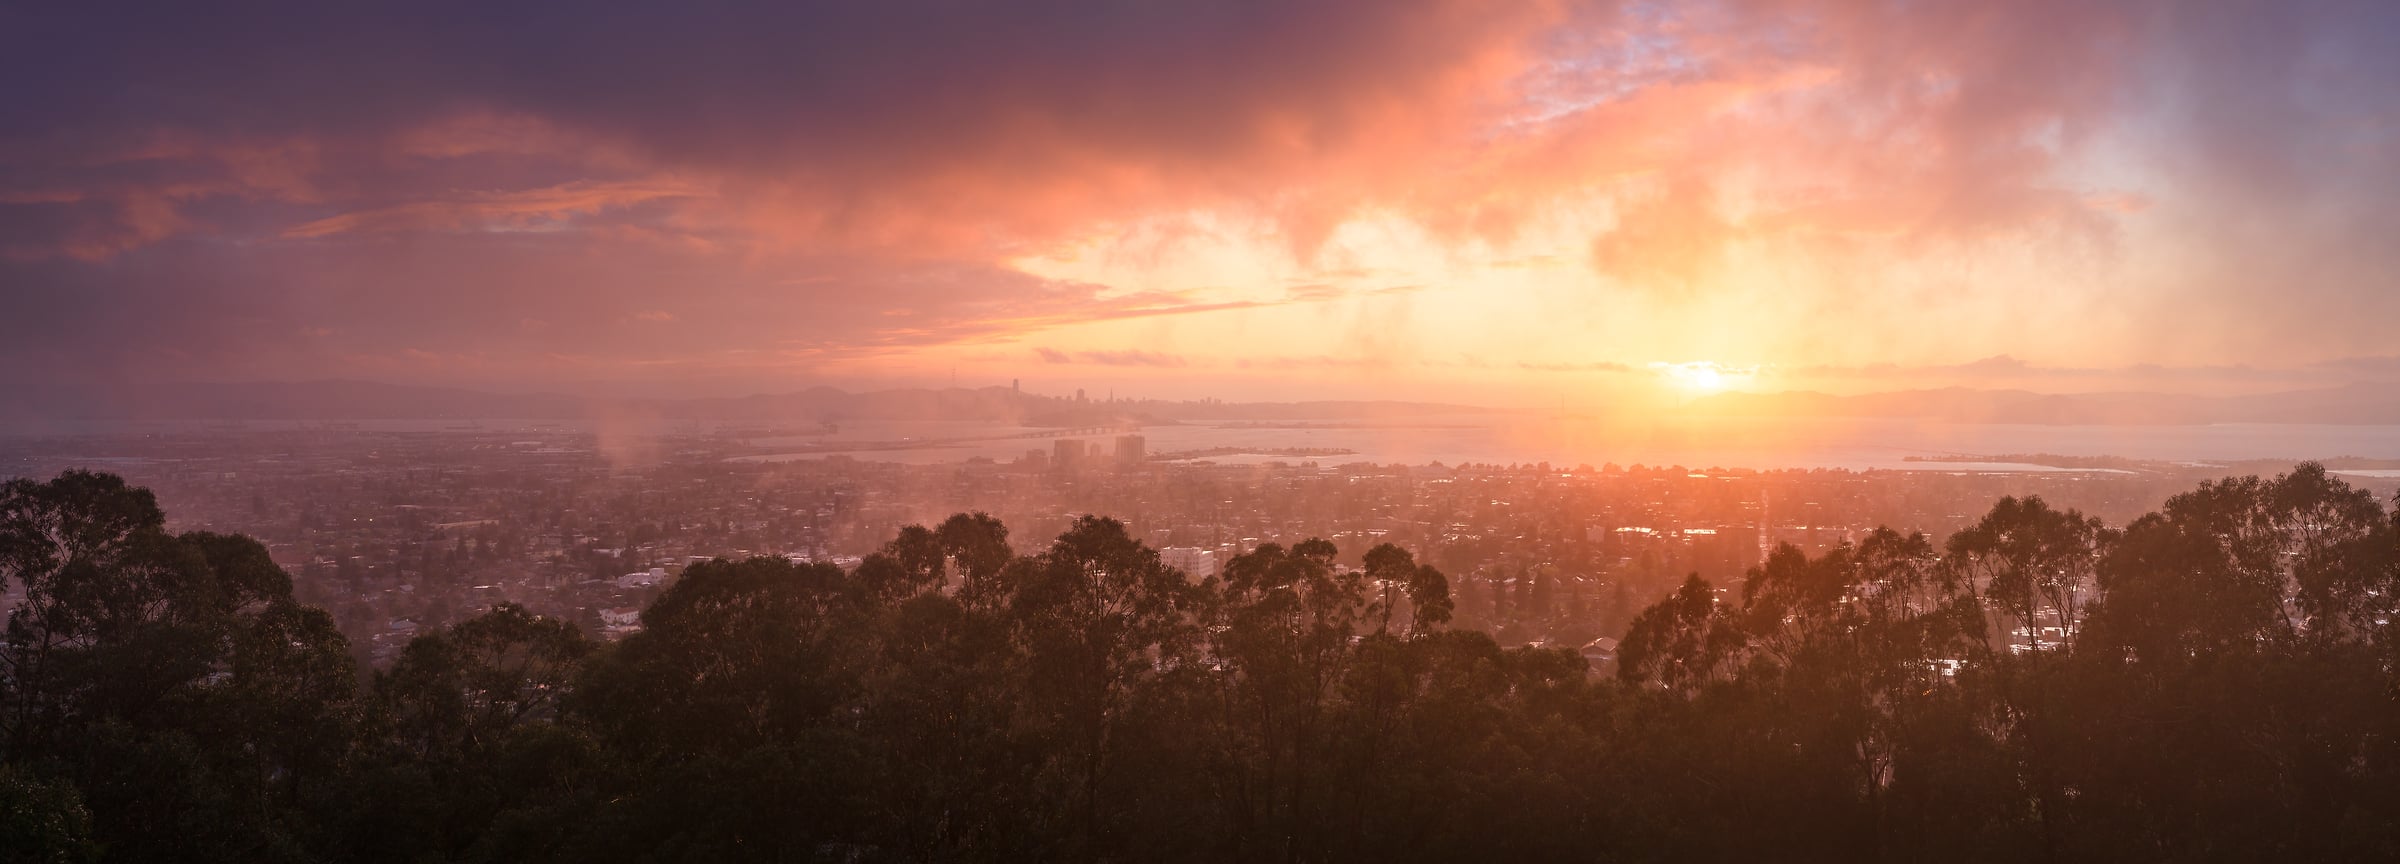 197 megapixels! A very high resolution, large-format VAST photo print of Berkeley, California with a storm clearing and the sun shining at sunset; cityscape photograph created by Jeff Lewis in Berkeley, California.